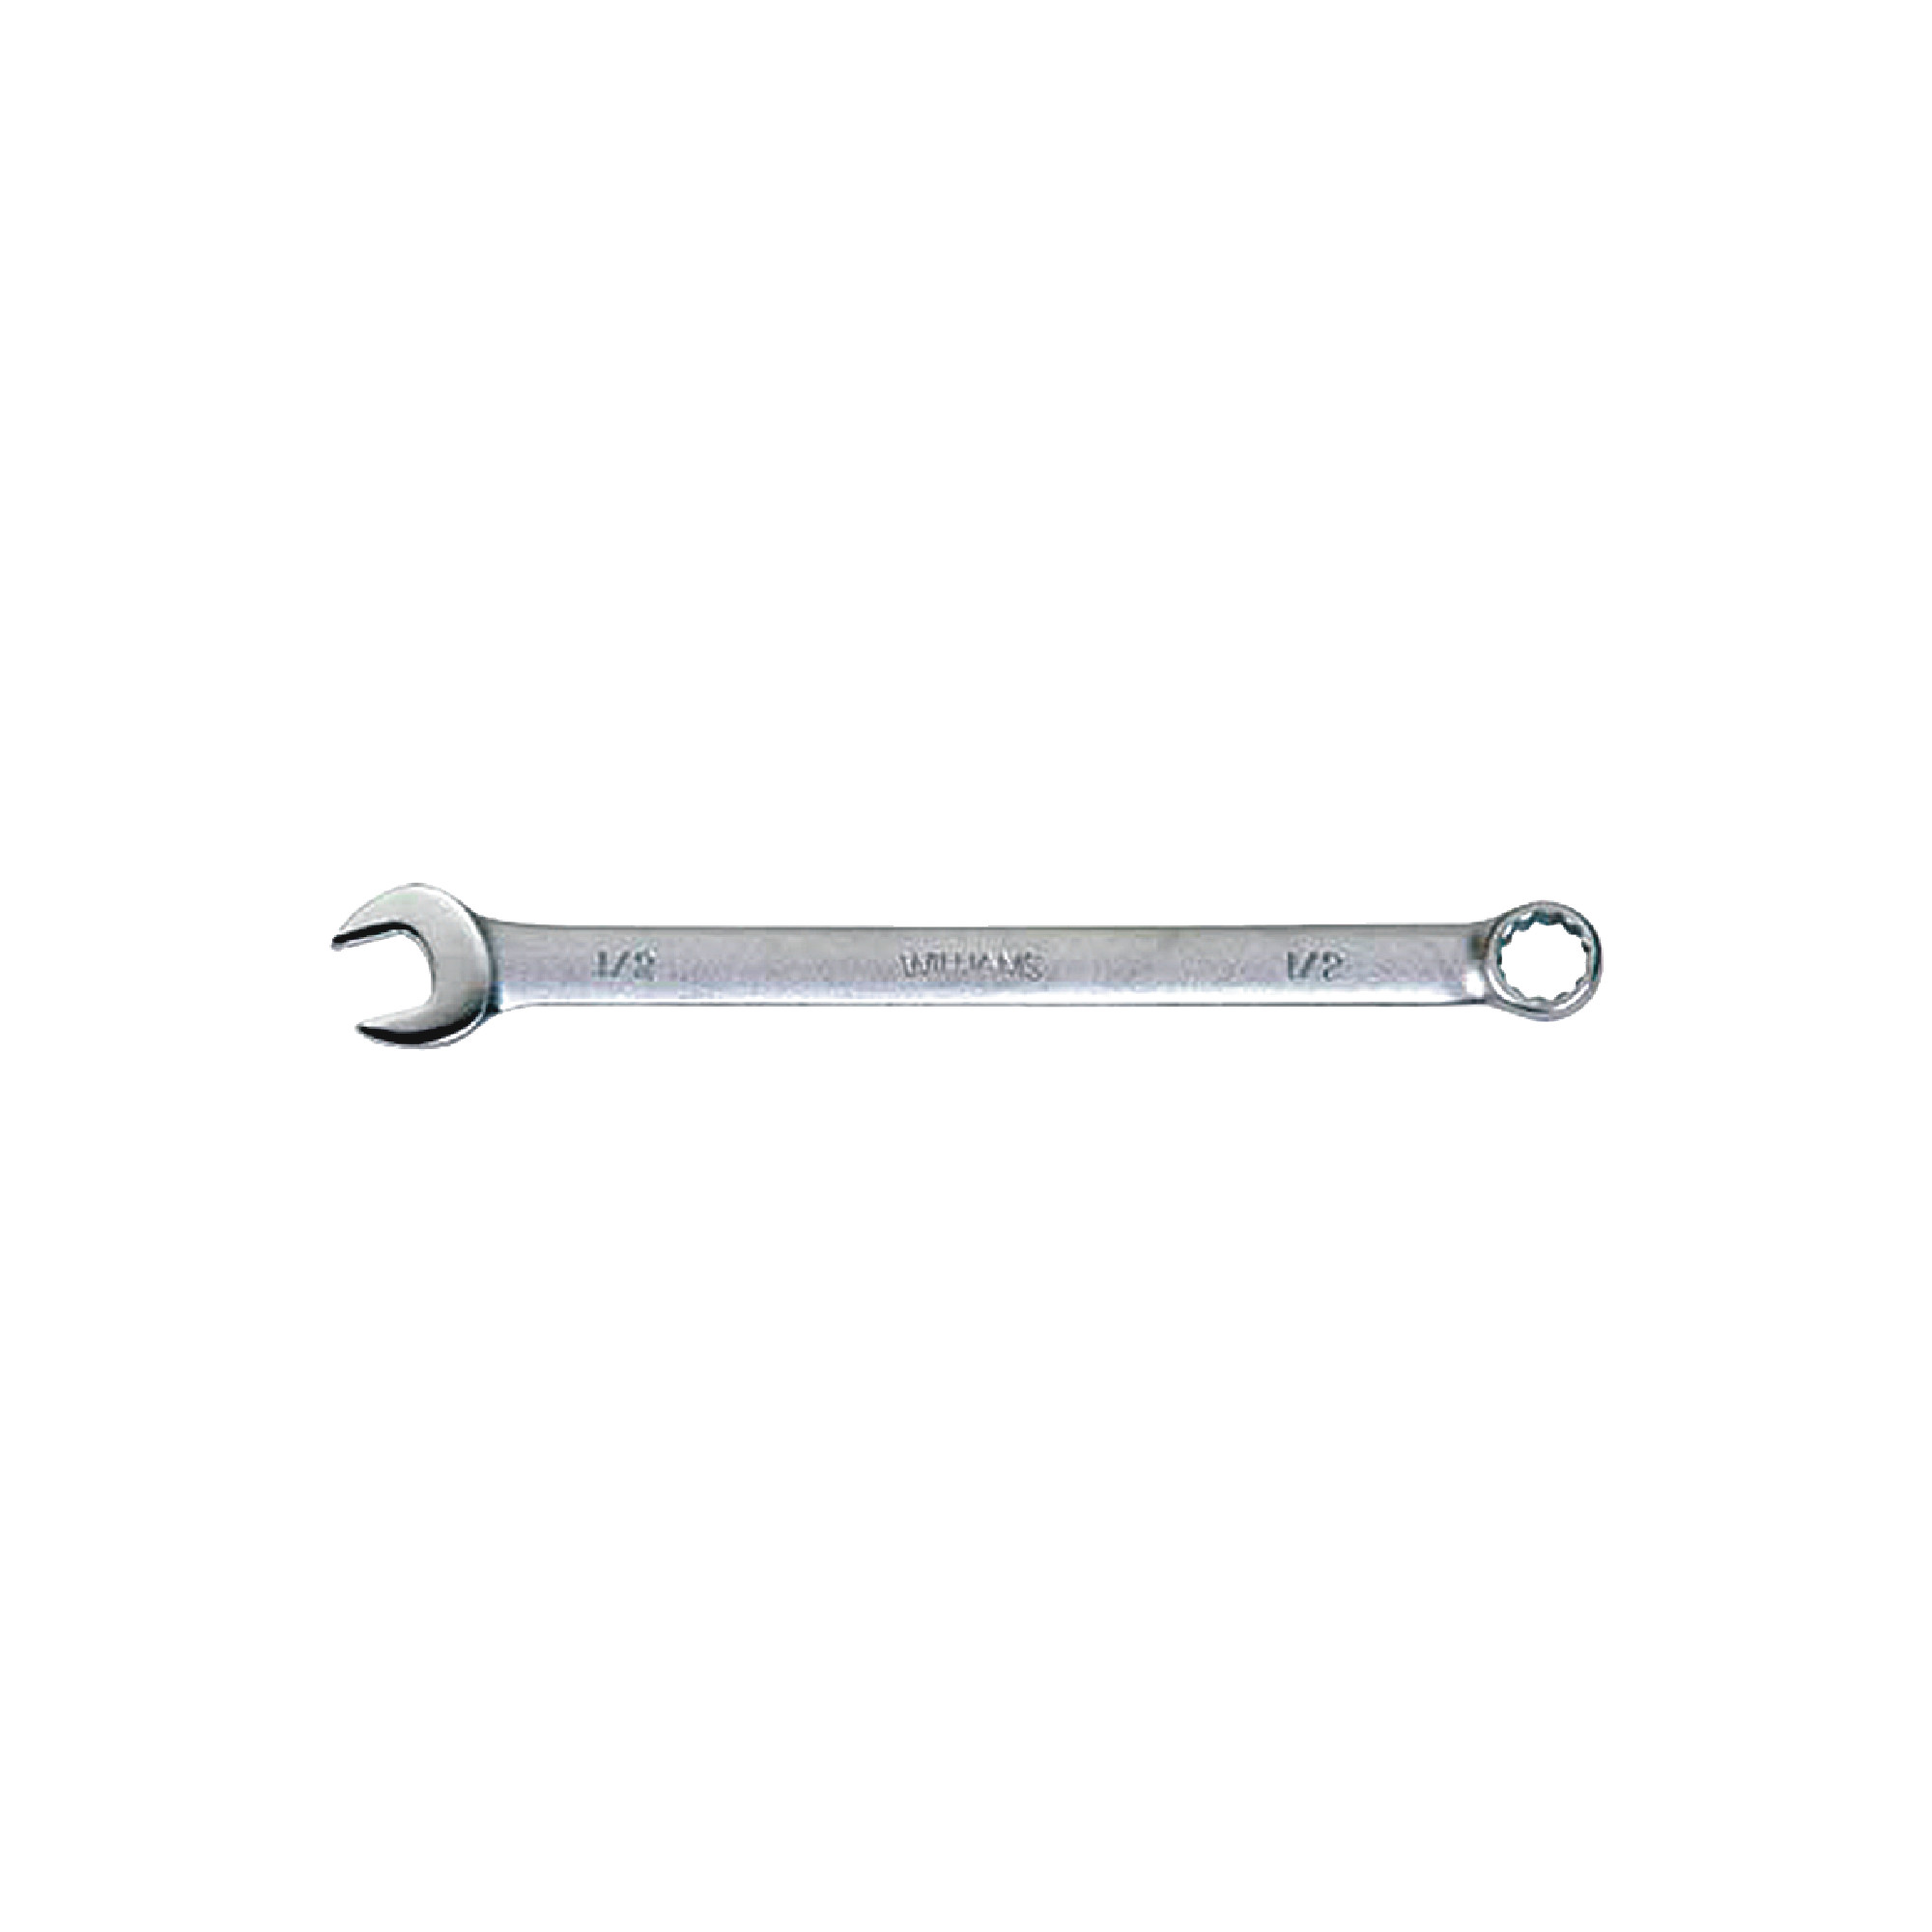 Satin Chrome Finish 16mm Combination Wrench